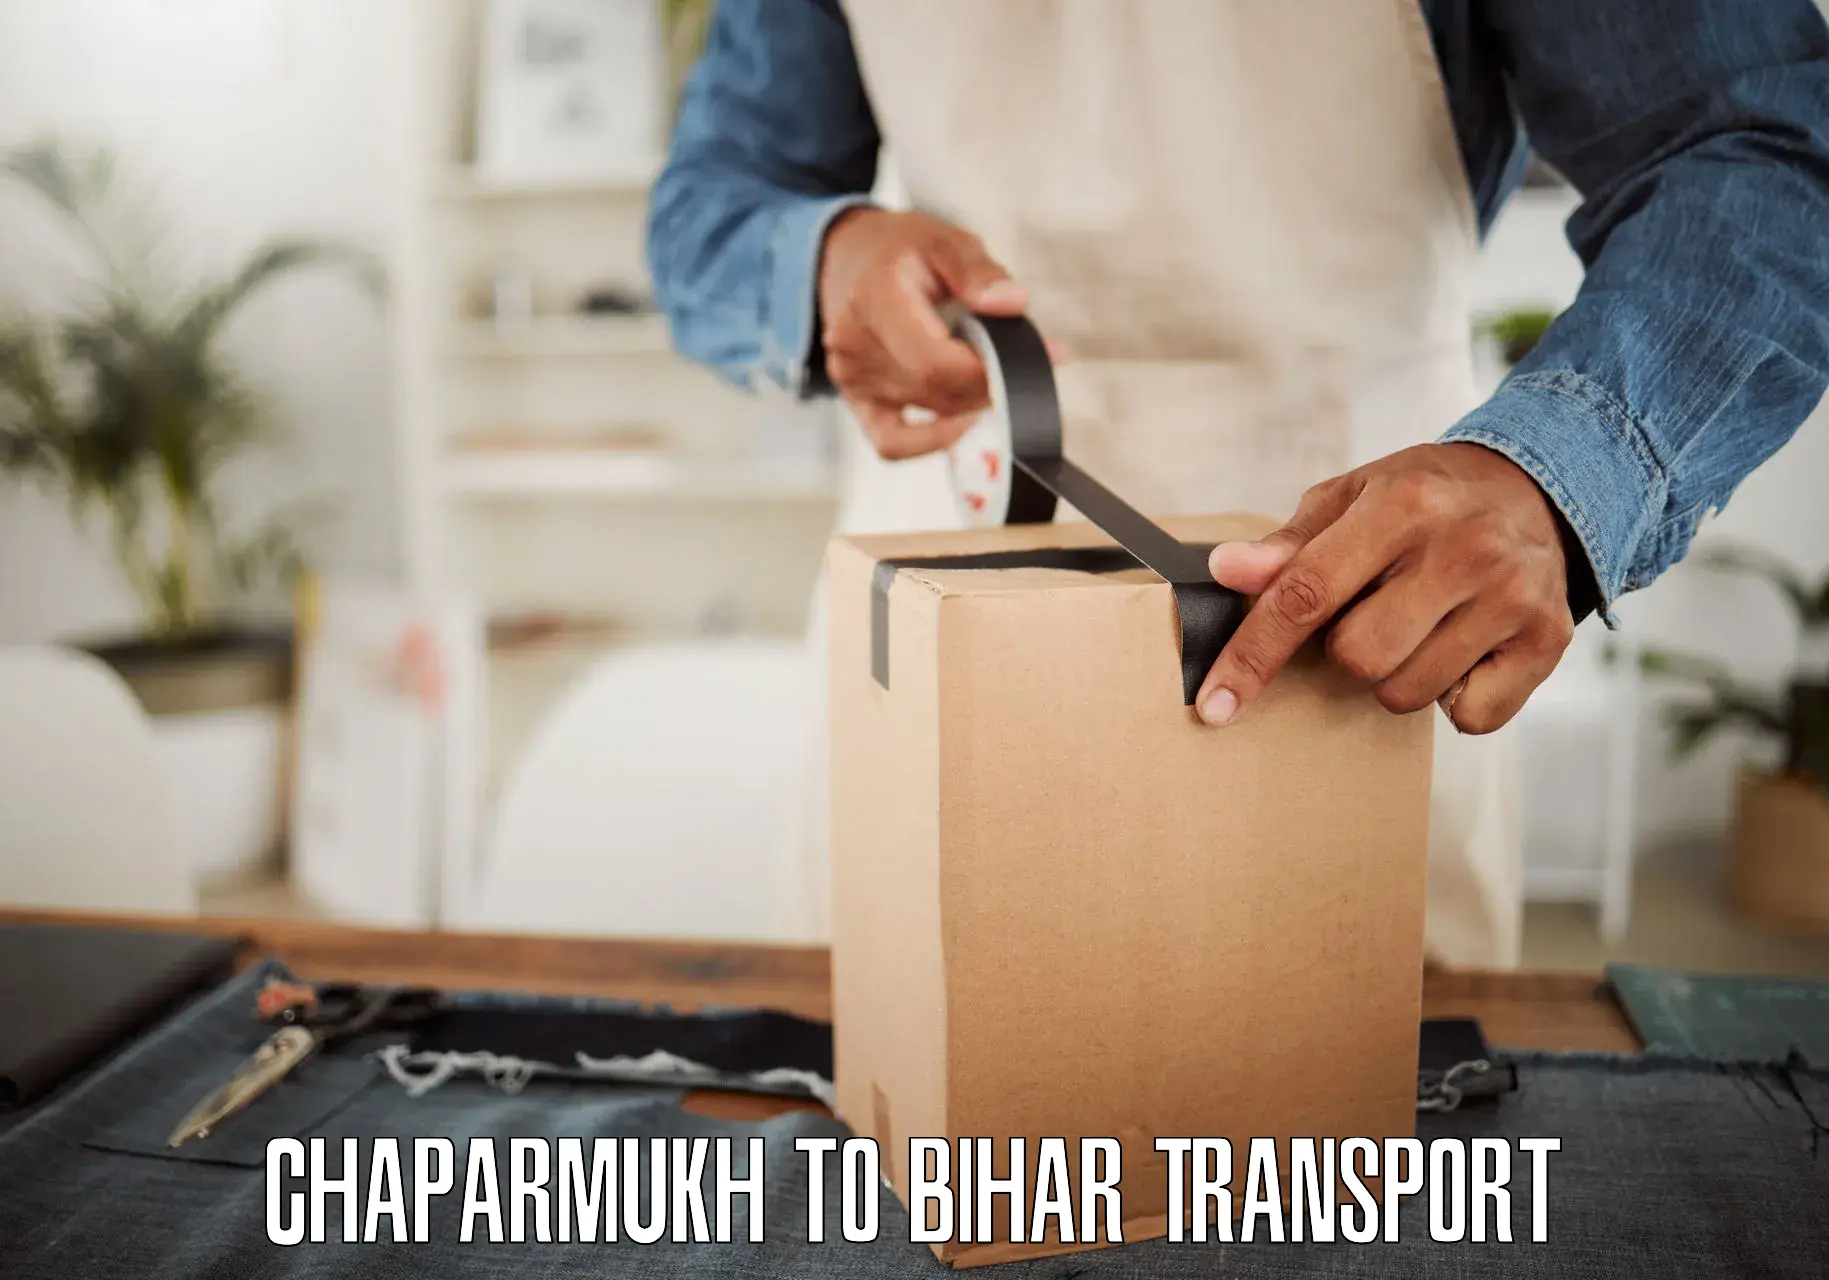 Truck transport companies in India Chaparmukh to Bakhtiarpur